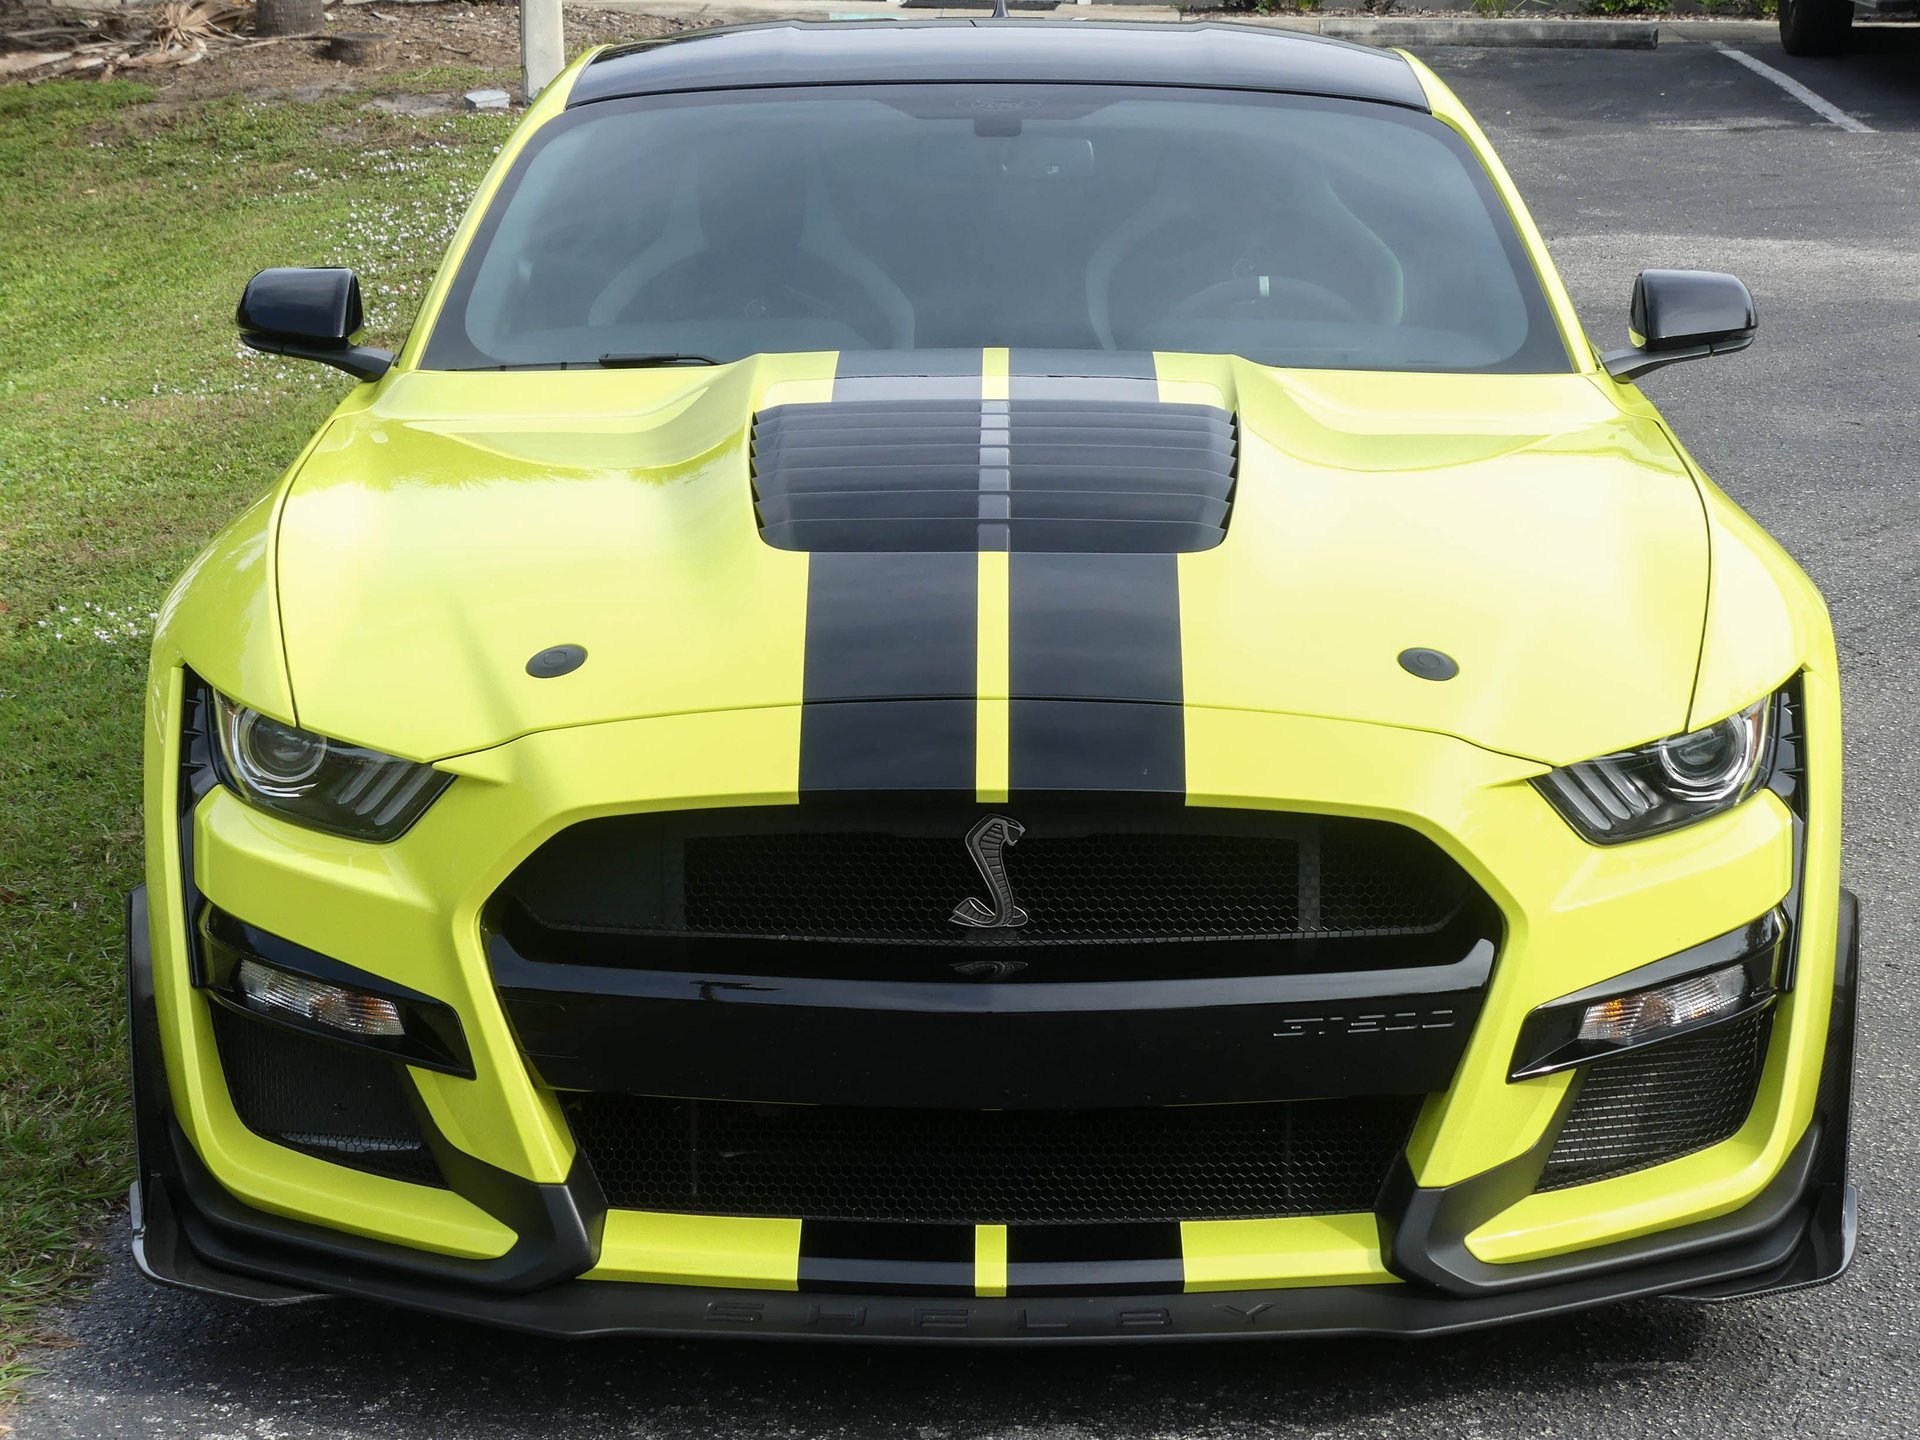 0700-TAMPA | 2021 Ford Mustang Shelby GT500 Carbon Fiber Track Pack | Survivor Classic Cars Services